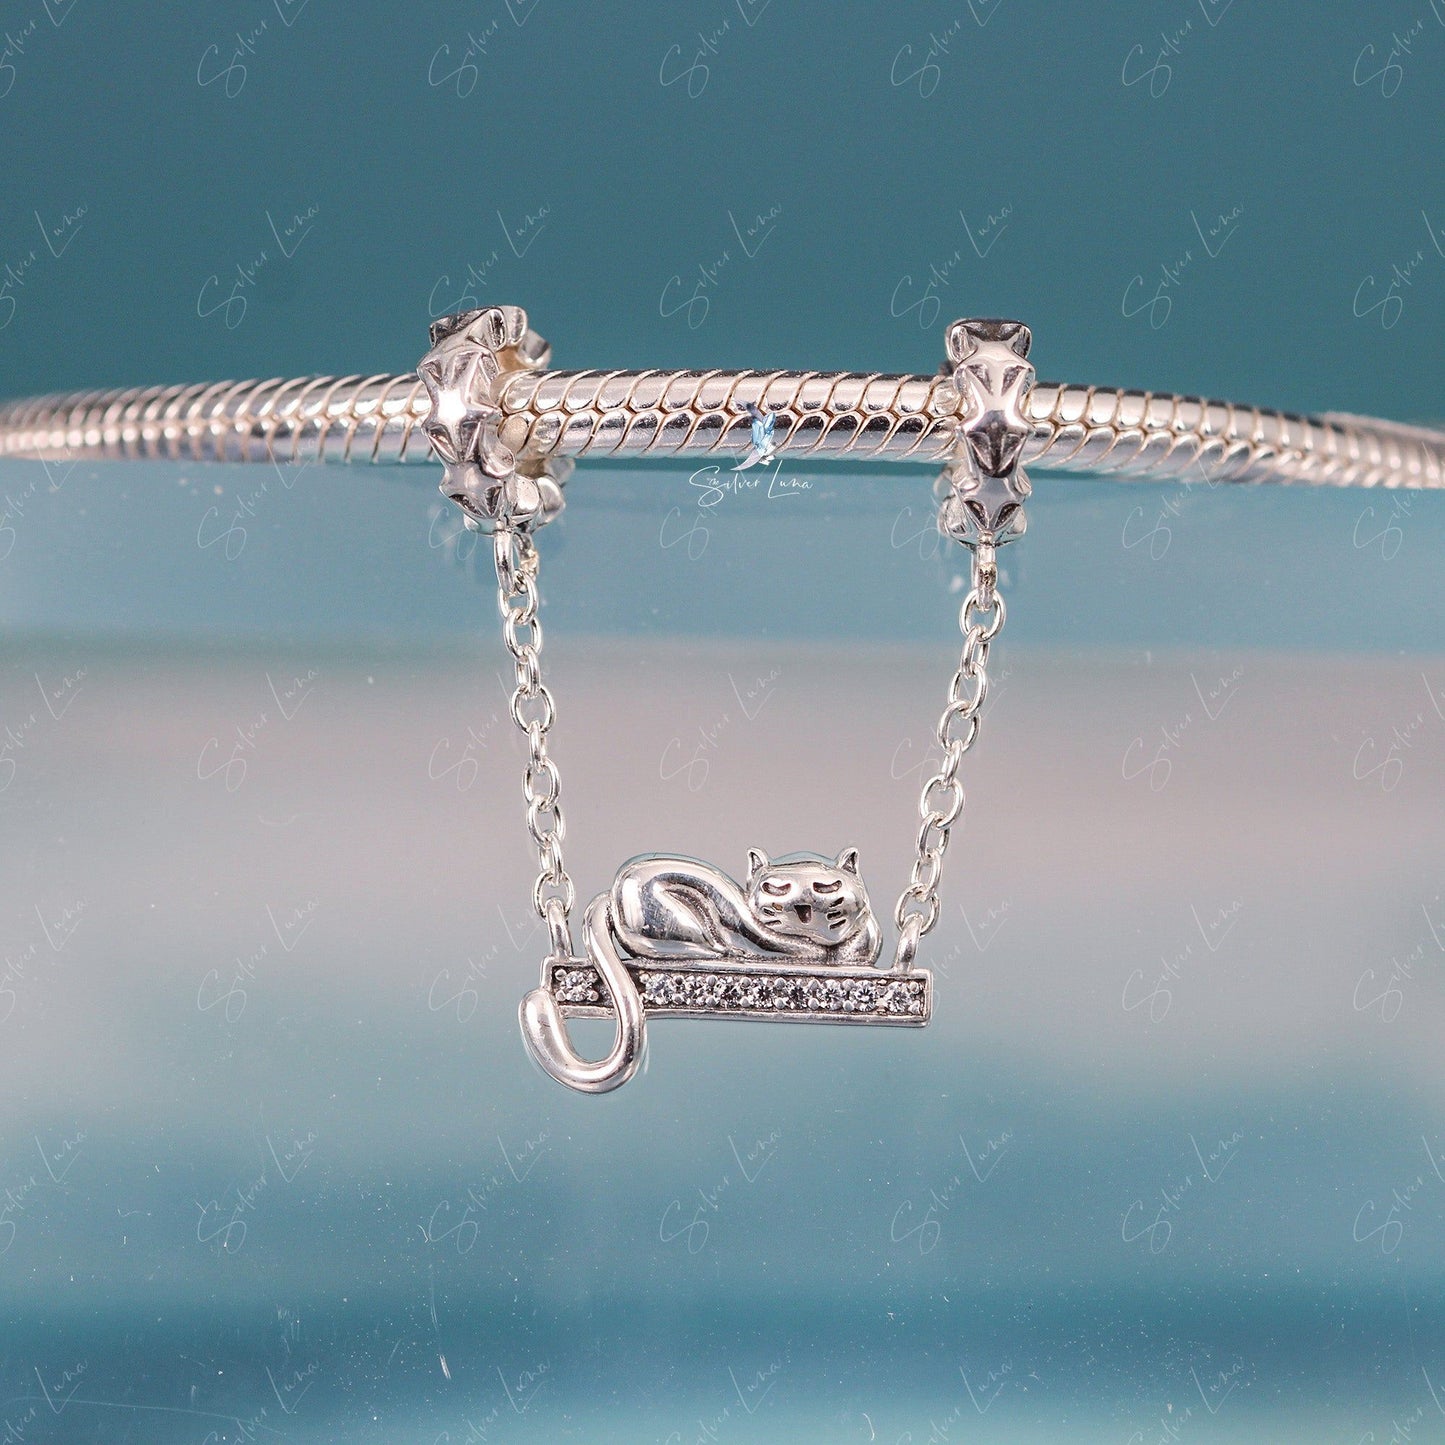 Lazy cat short dangle safety chain